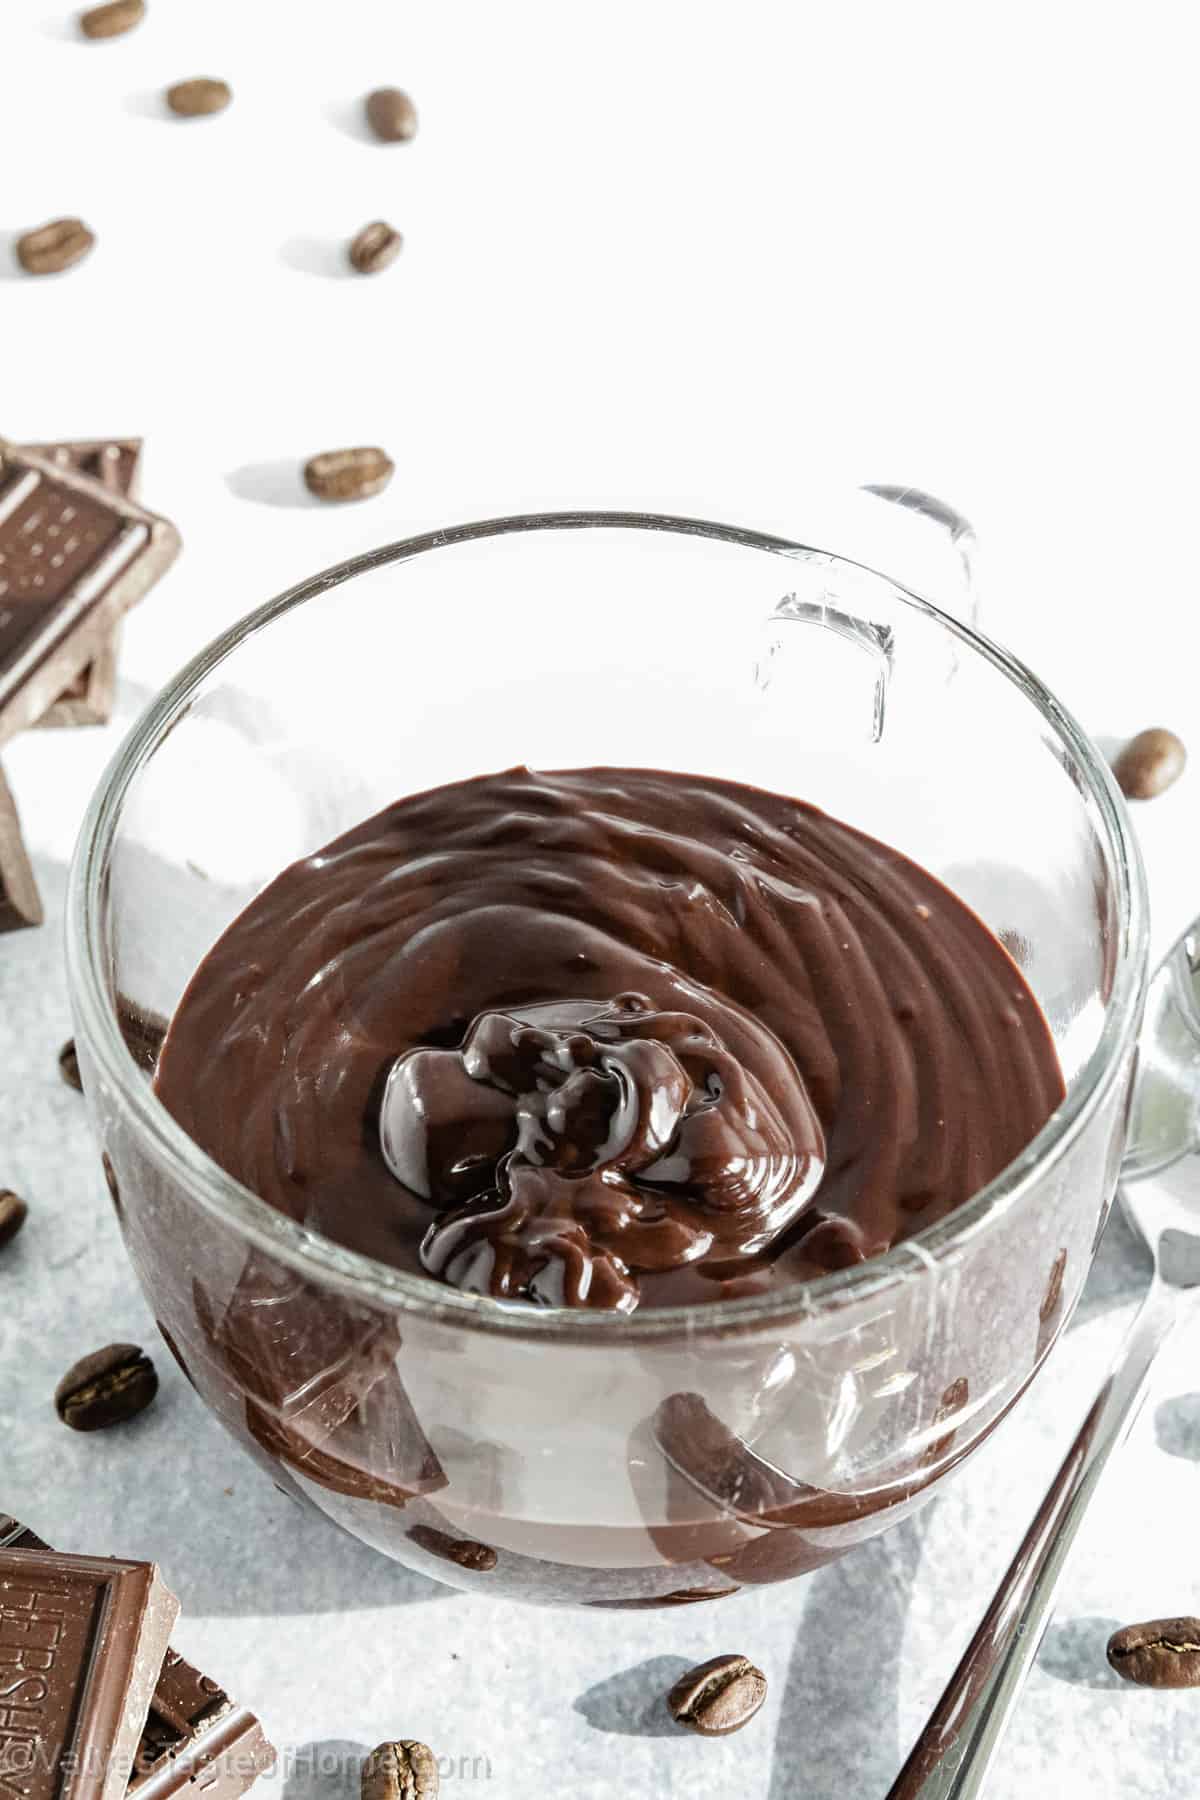 Chocolate ganache is an incredibly versatile ingredient that you can use to top or fill cakes, cupcakes, pastries, and many other desserts.